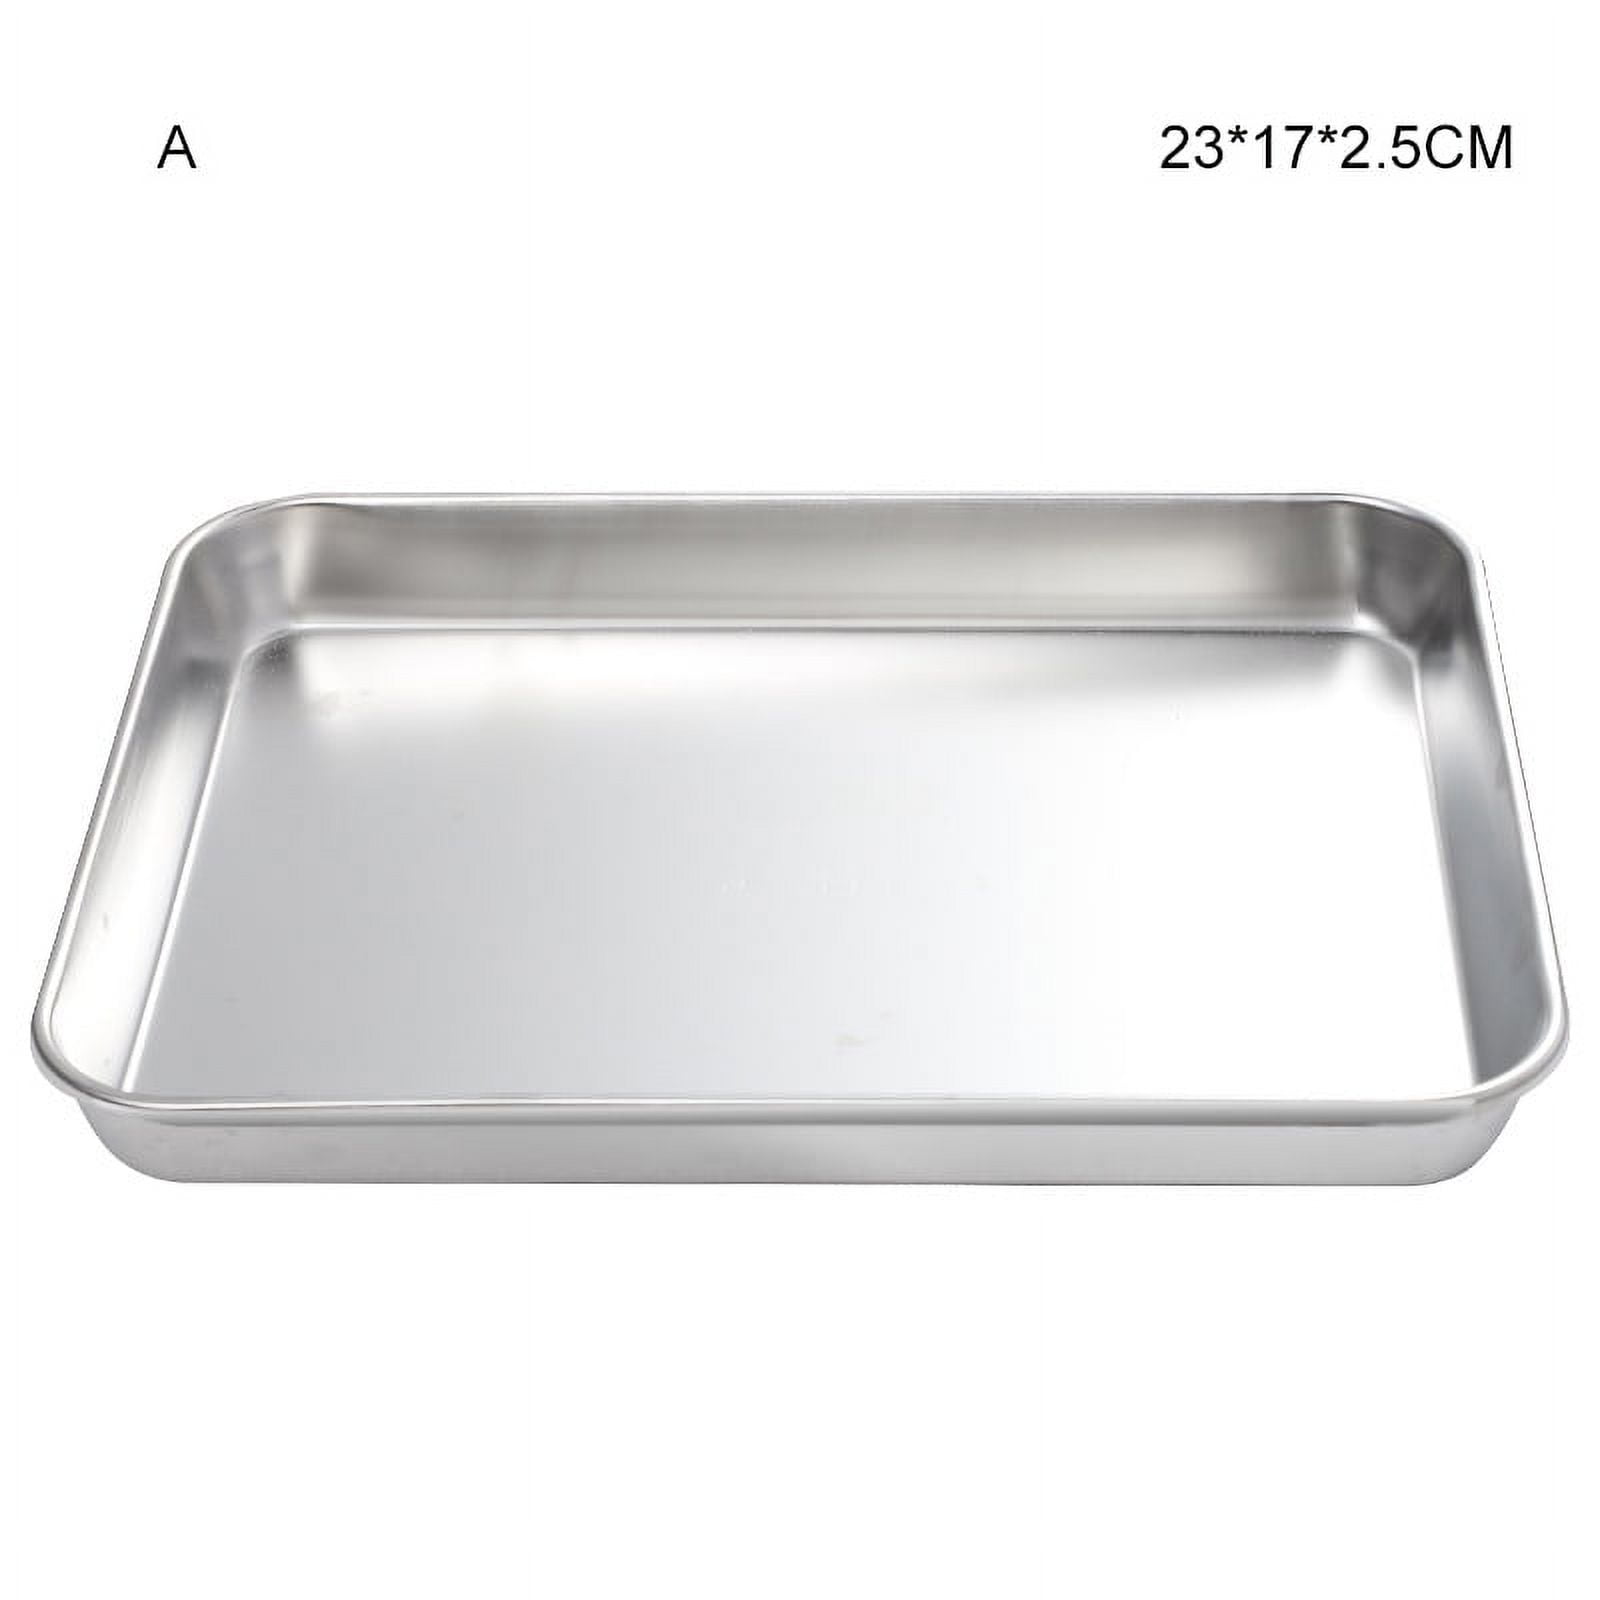 Heavy Duty Stainless Steel Baking Pans Toaster Oven Pan Barbeque Grill  Sheet Pan Hotel Sushi Cookie Sheet